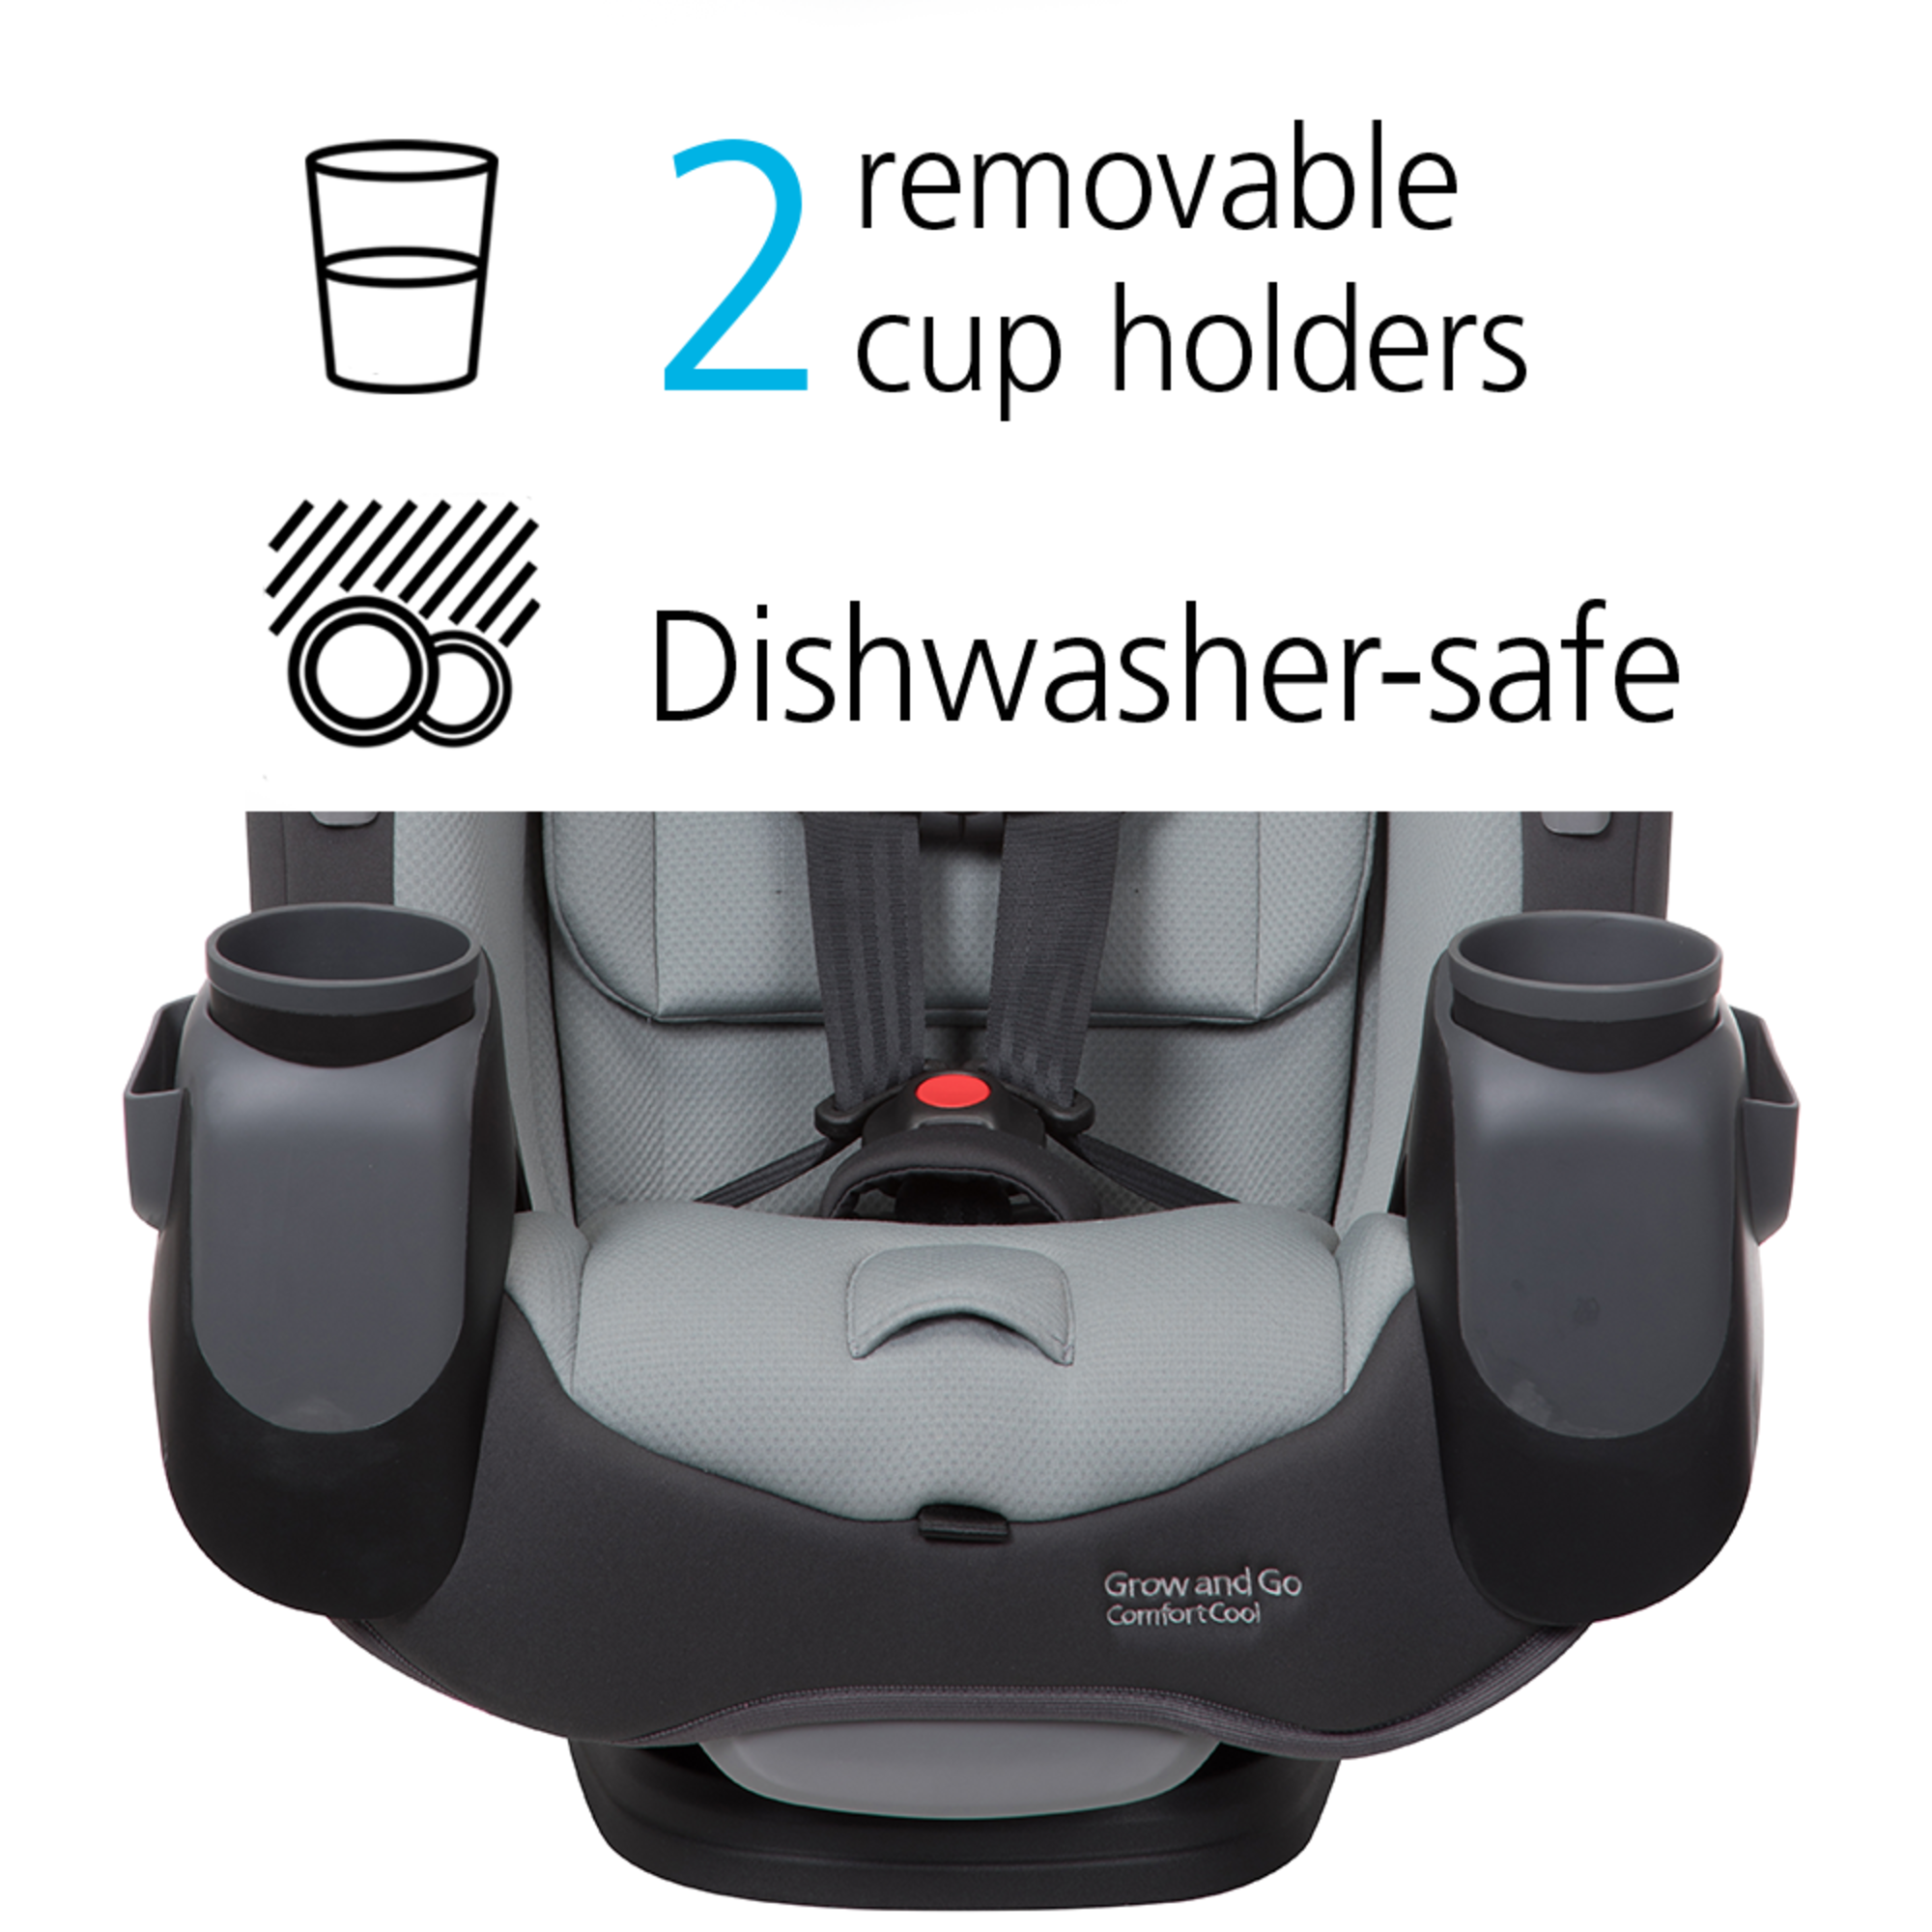 Car seat with two removable cup holders and dishwasher safe.